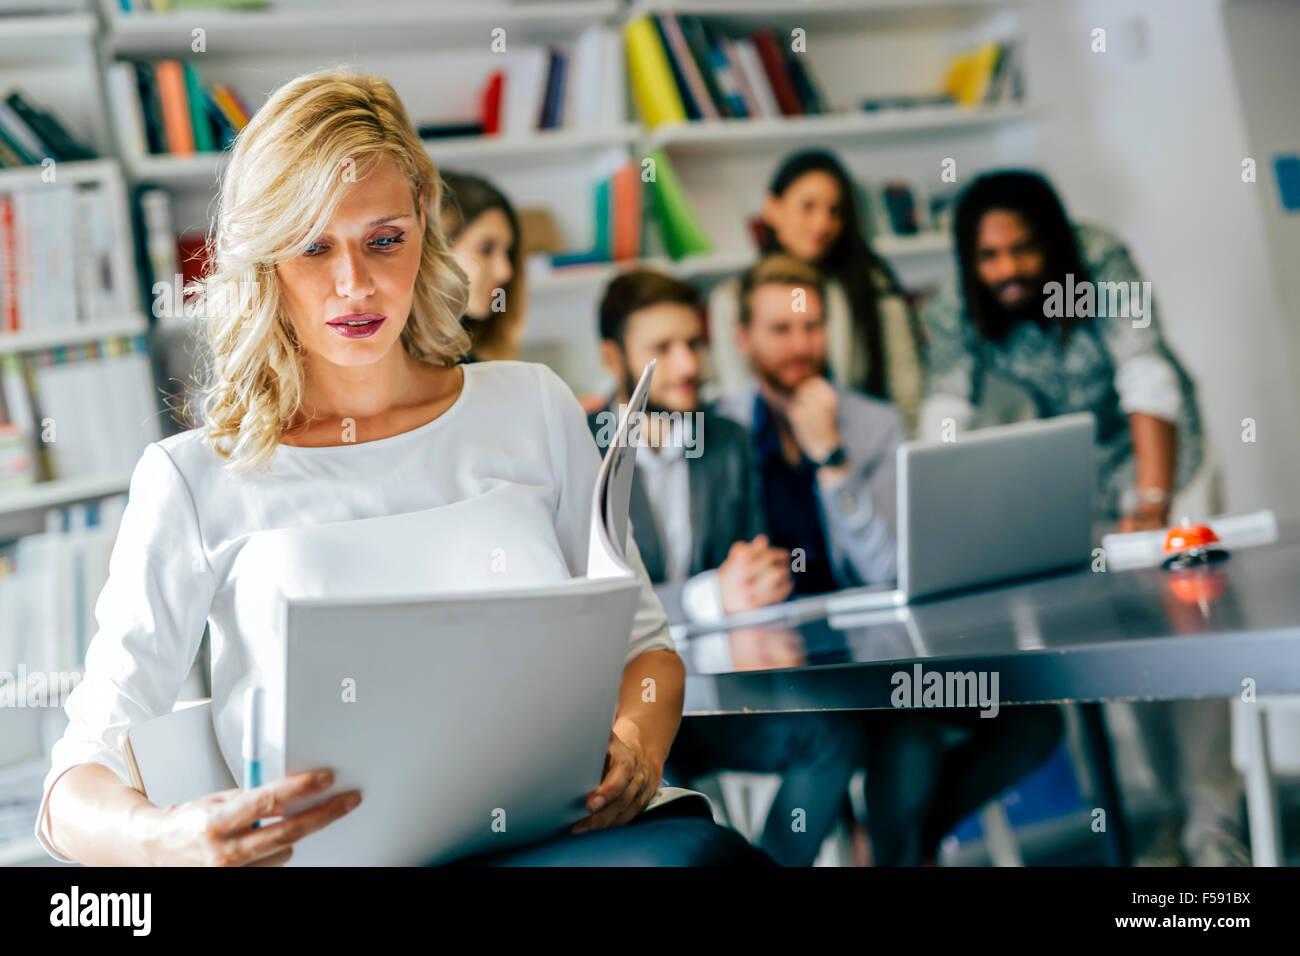 Beautiful woman reading a document while  her employees are solving problems in the background Stock Photo